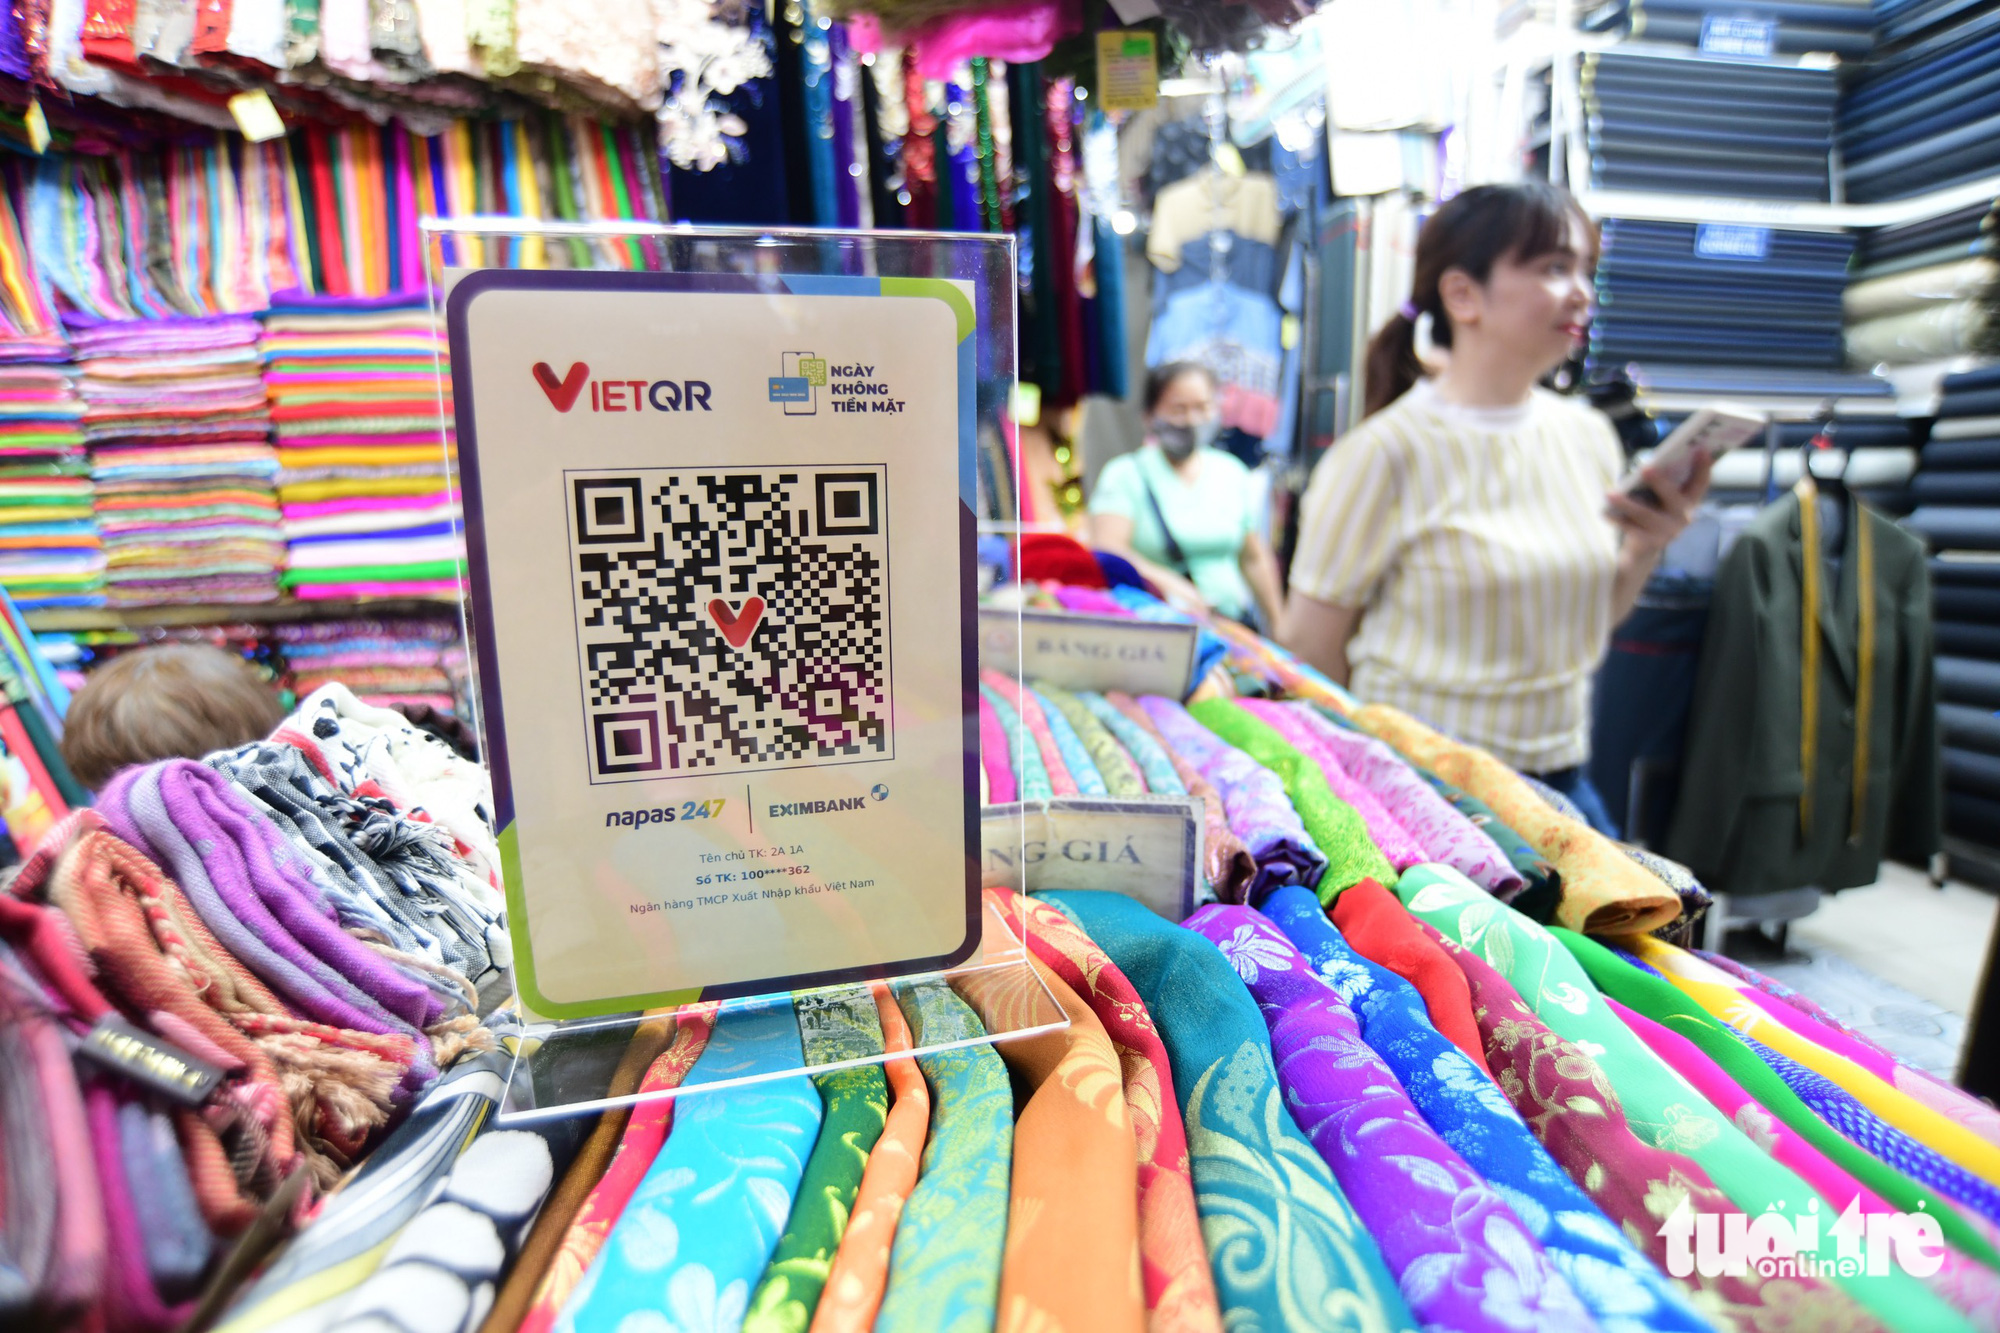 More markets in Ho Chi Minh City will adopt the cashless payment method in the upcoming period. Photo: Quang Dinh / Tuoi Tre